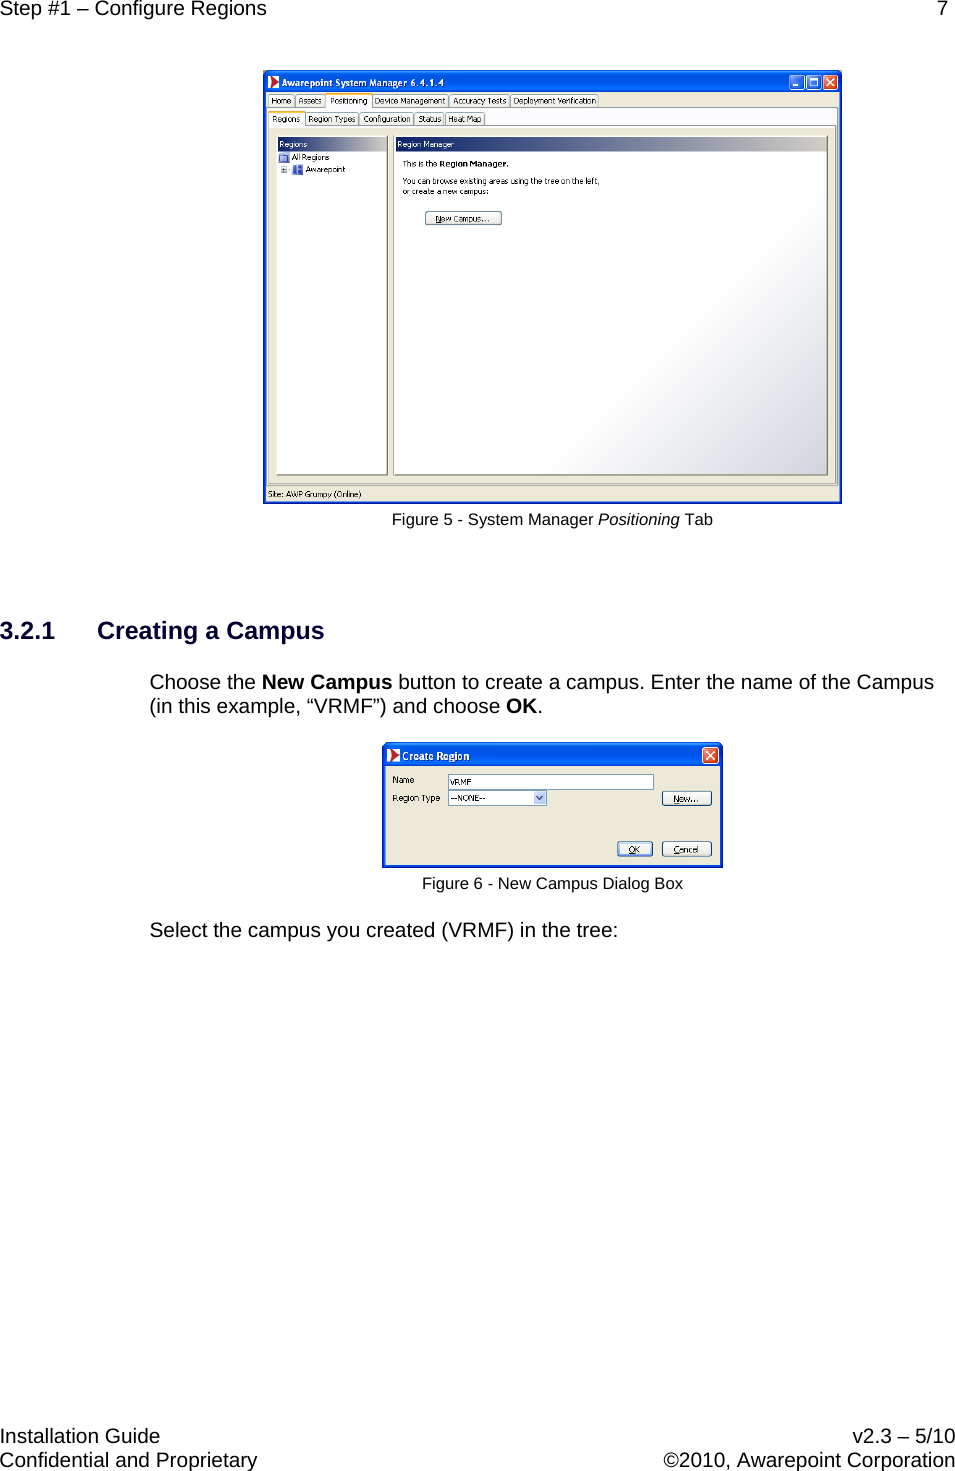 Step #1 – Configure Regions    7   Installation Guide    v2.3 – 5/10 Confidential and Proprietary    ©2010, Awarepoint Corporation   Figure 5 - System Manager Positioning Tab  3.2.1 Creating a Campus Choose the New Campus button to create a campus. Enter the name of the Campus (in this example, “VRMF”) and choose OK.  Figure 6 - New Campus Dialog Box Select the campus you created (VRMF) in the tree: 